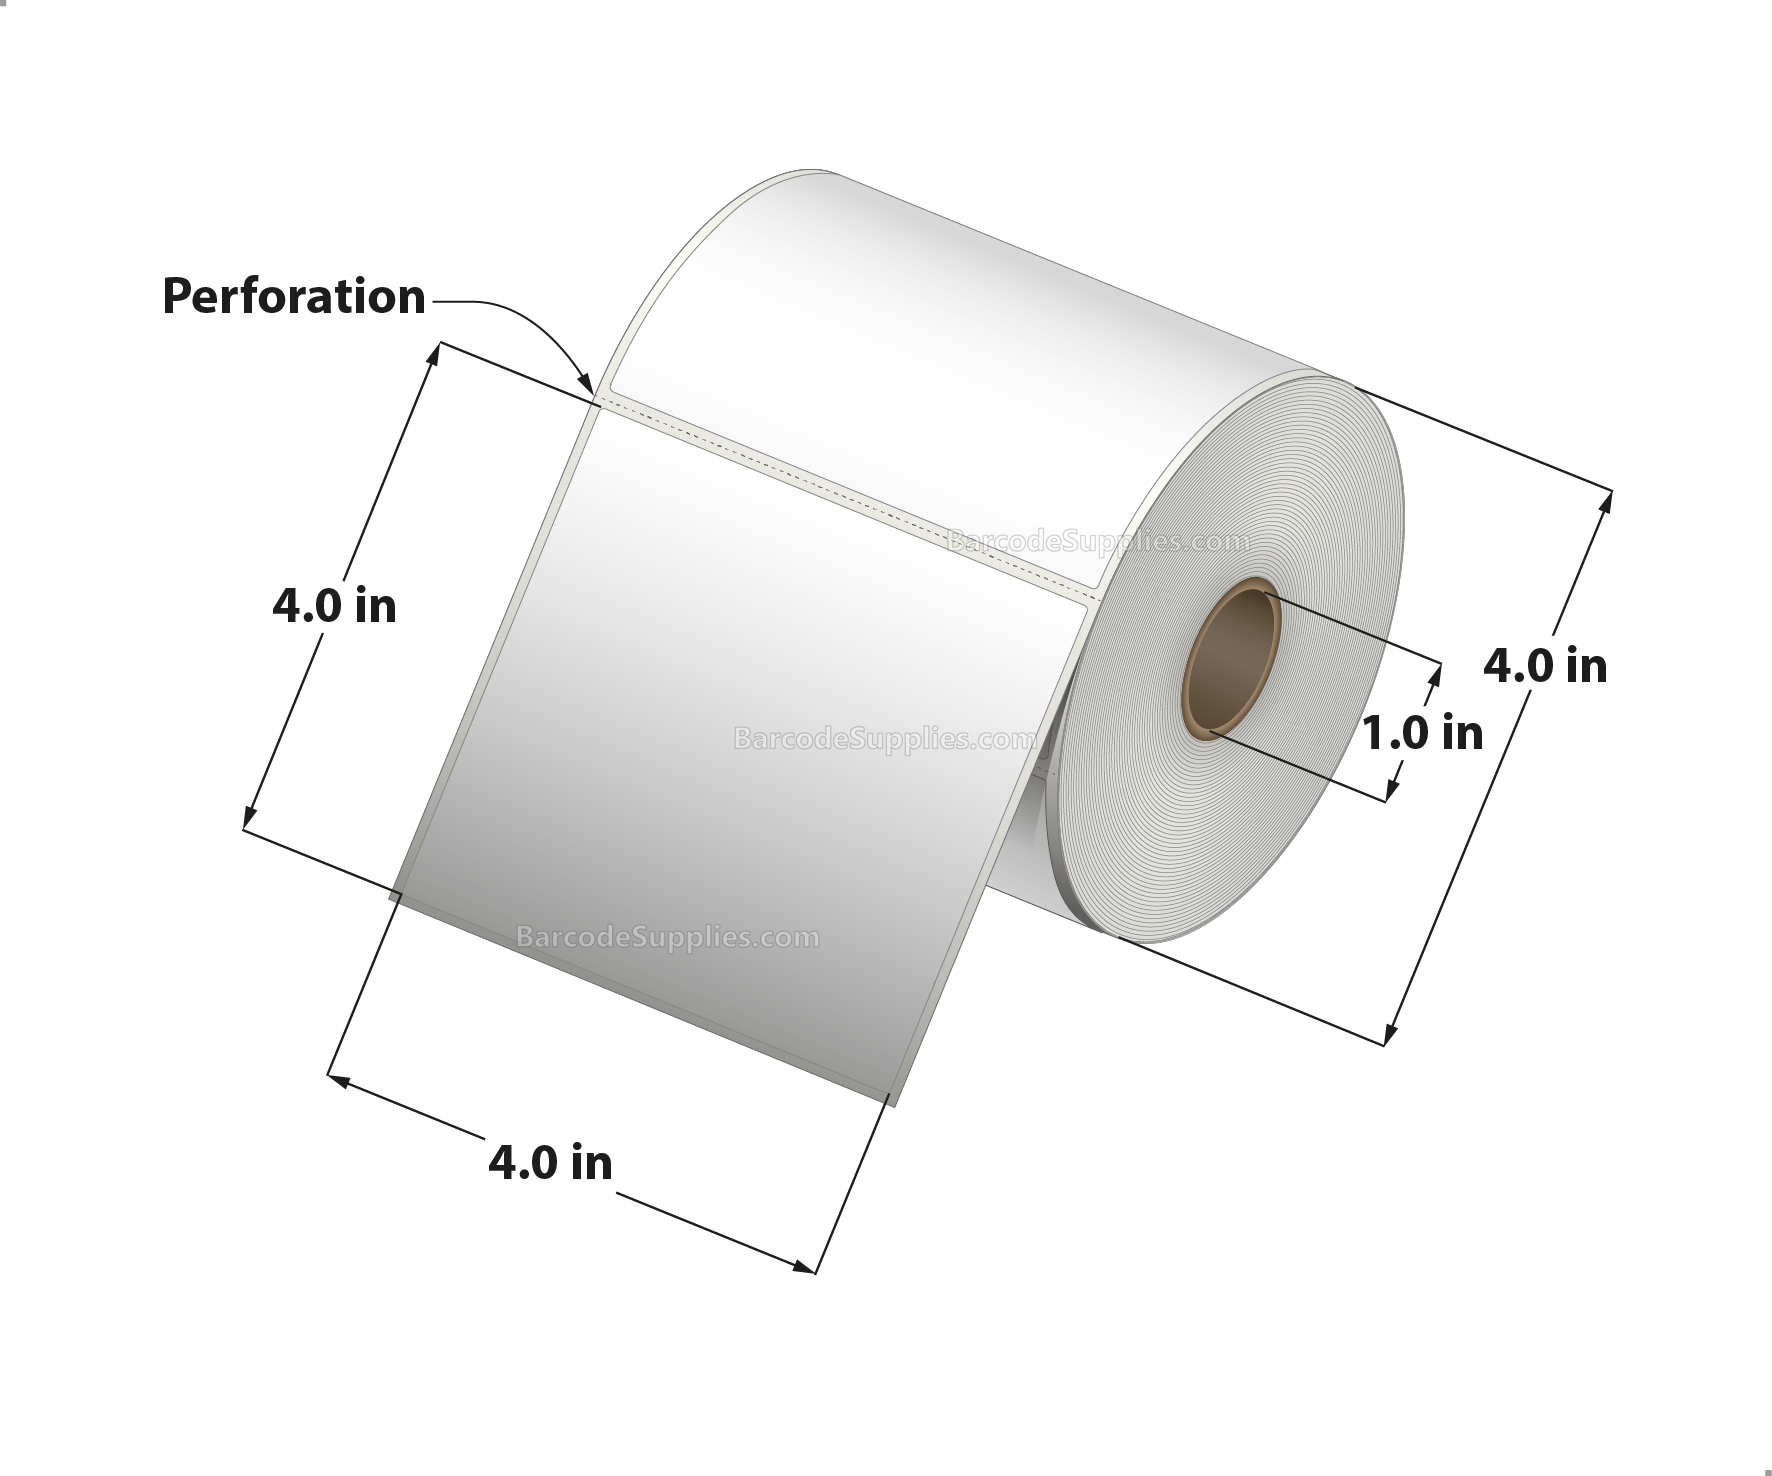 4 x 4 Thermal Transfer White Labels With Rubber Adhesive - Perforated - 377 Labels Per Roll - Carton Of 12 Rolls - 4524 Labels Total - MPN: RTT4-400400-1P